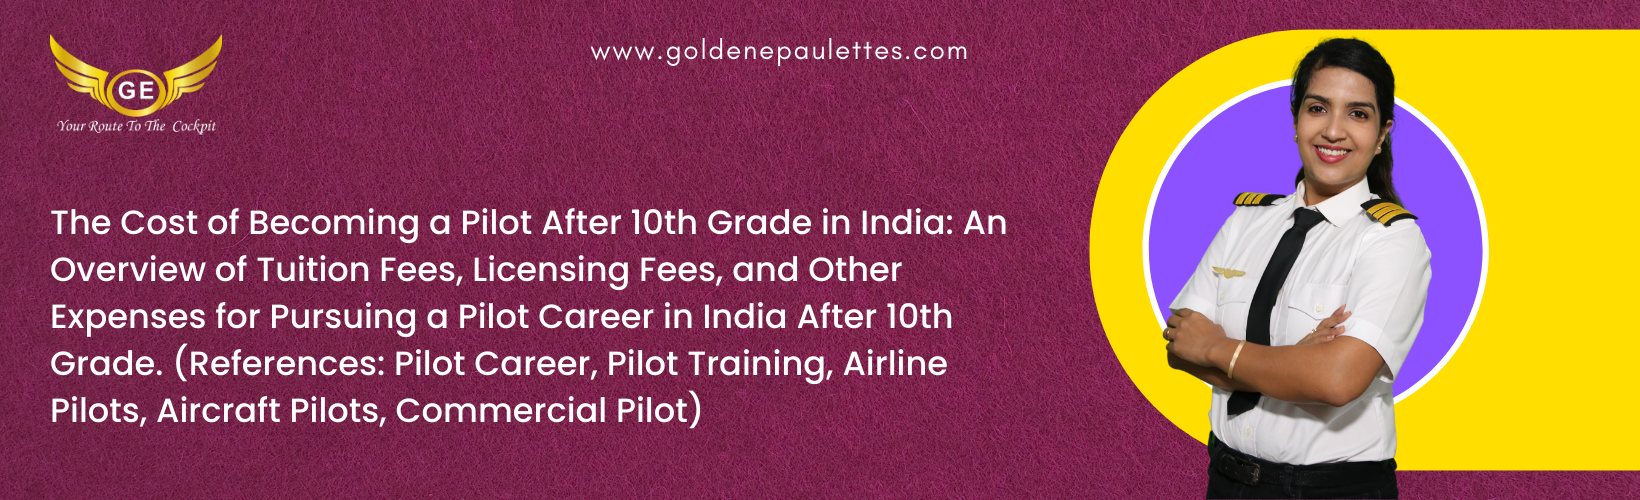 The Cost of Becoming a Pilot After 10th Grade in India